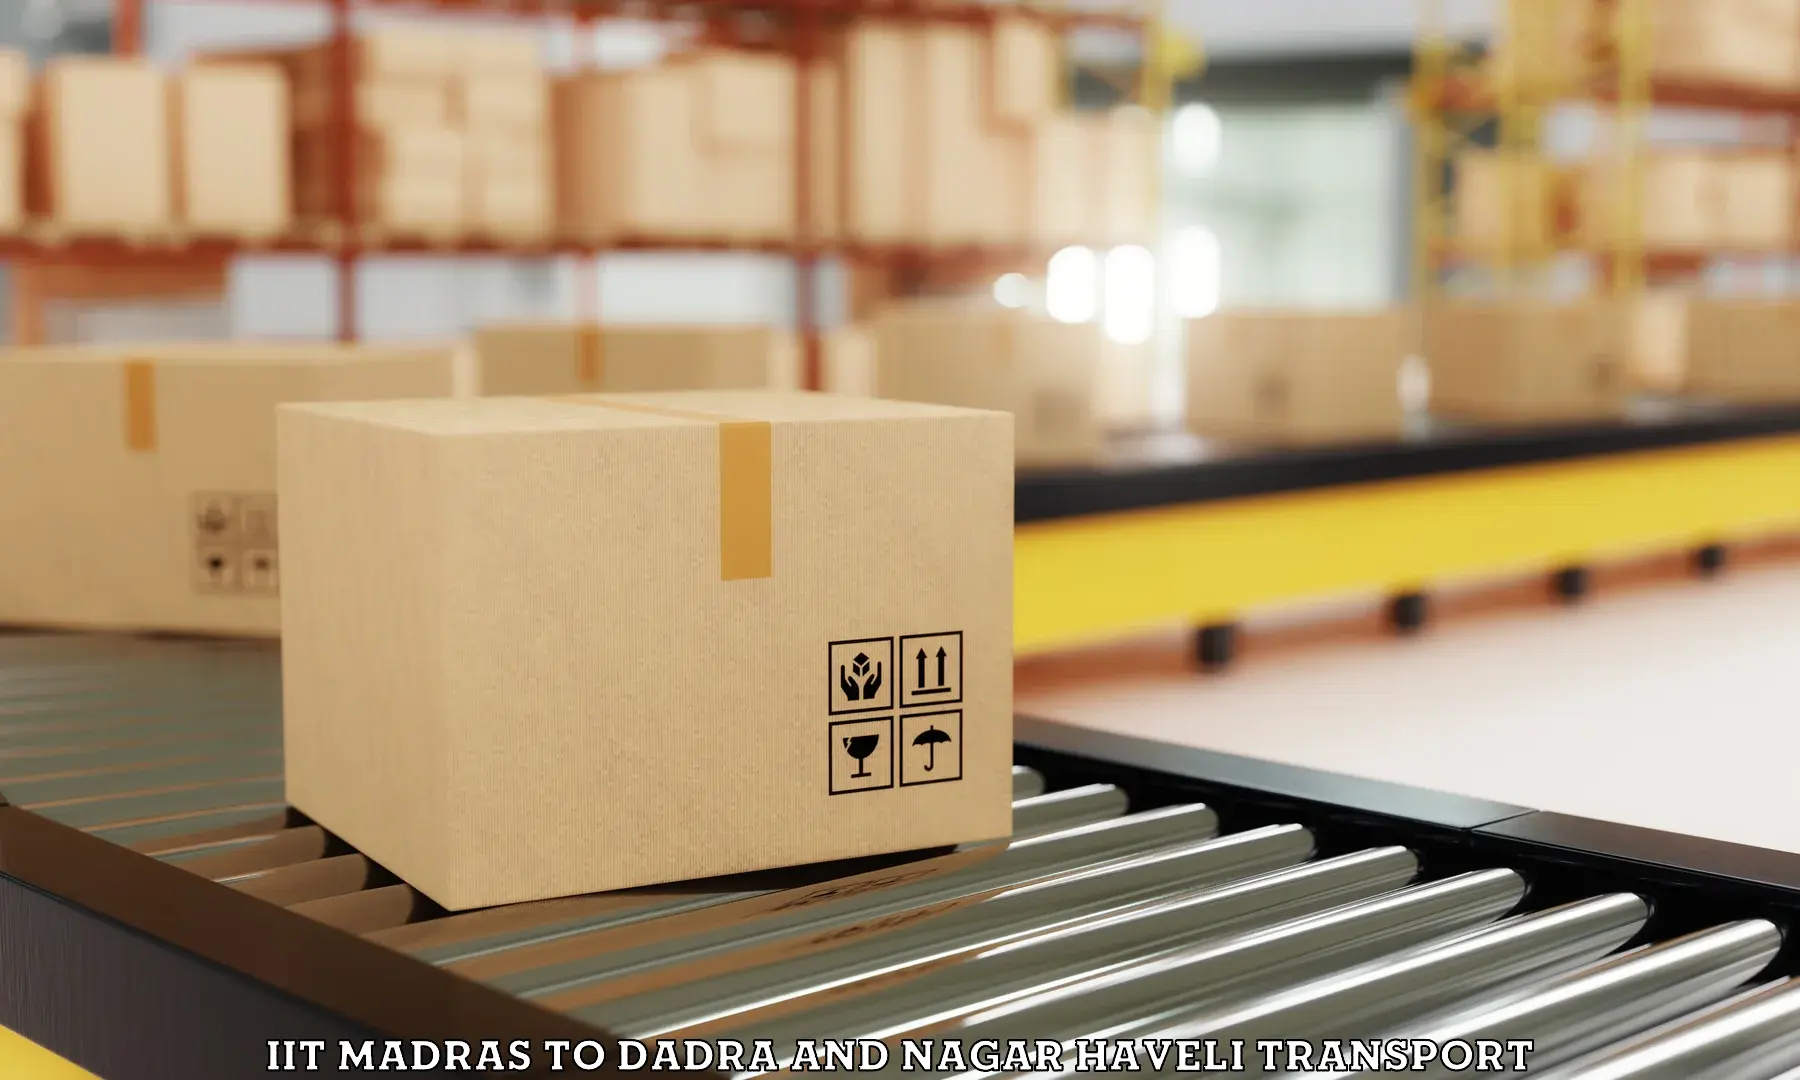 Daily parcel service transport IIT Madras to Dadra and Nagar Haveli